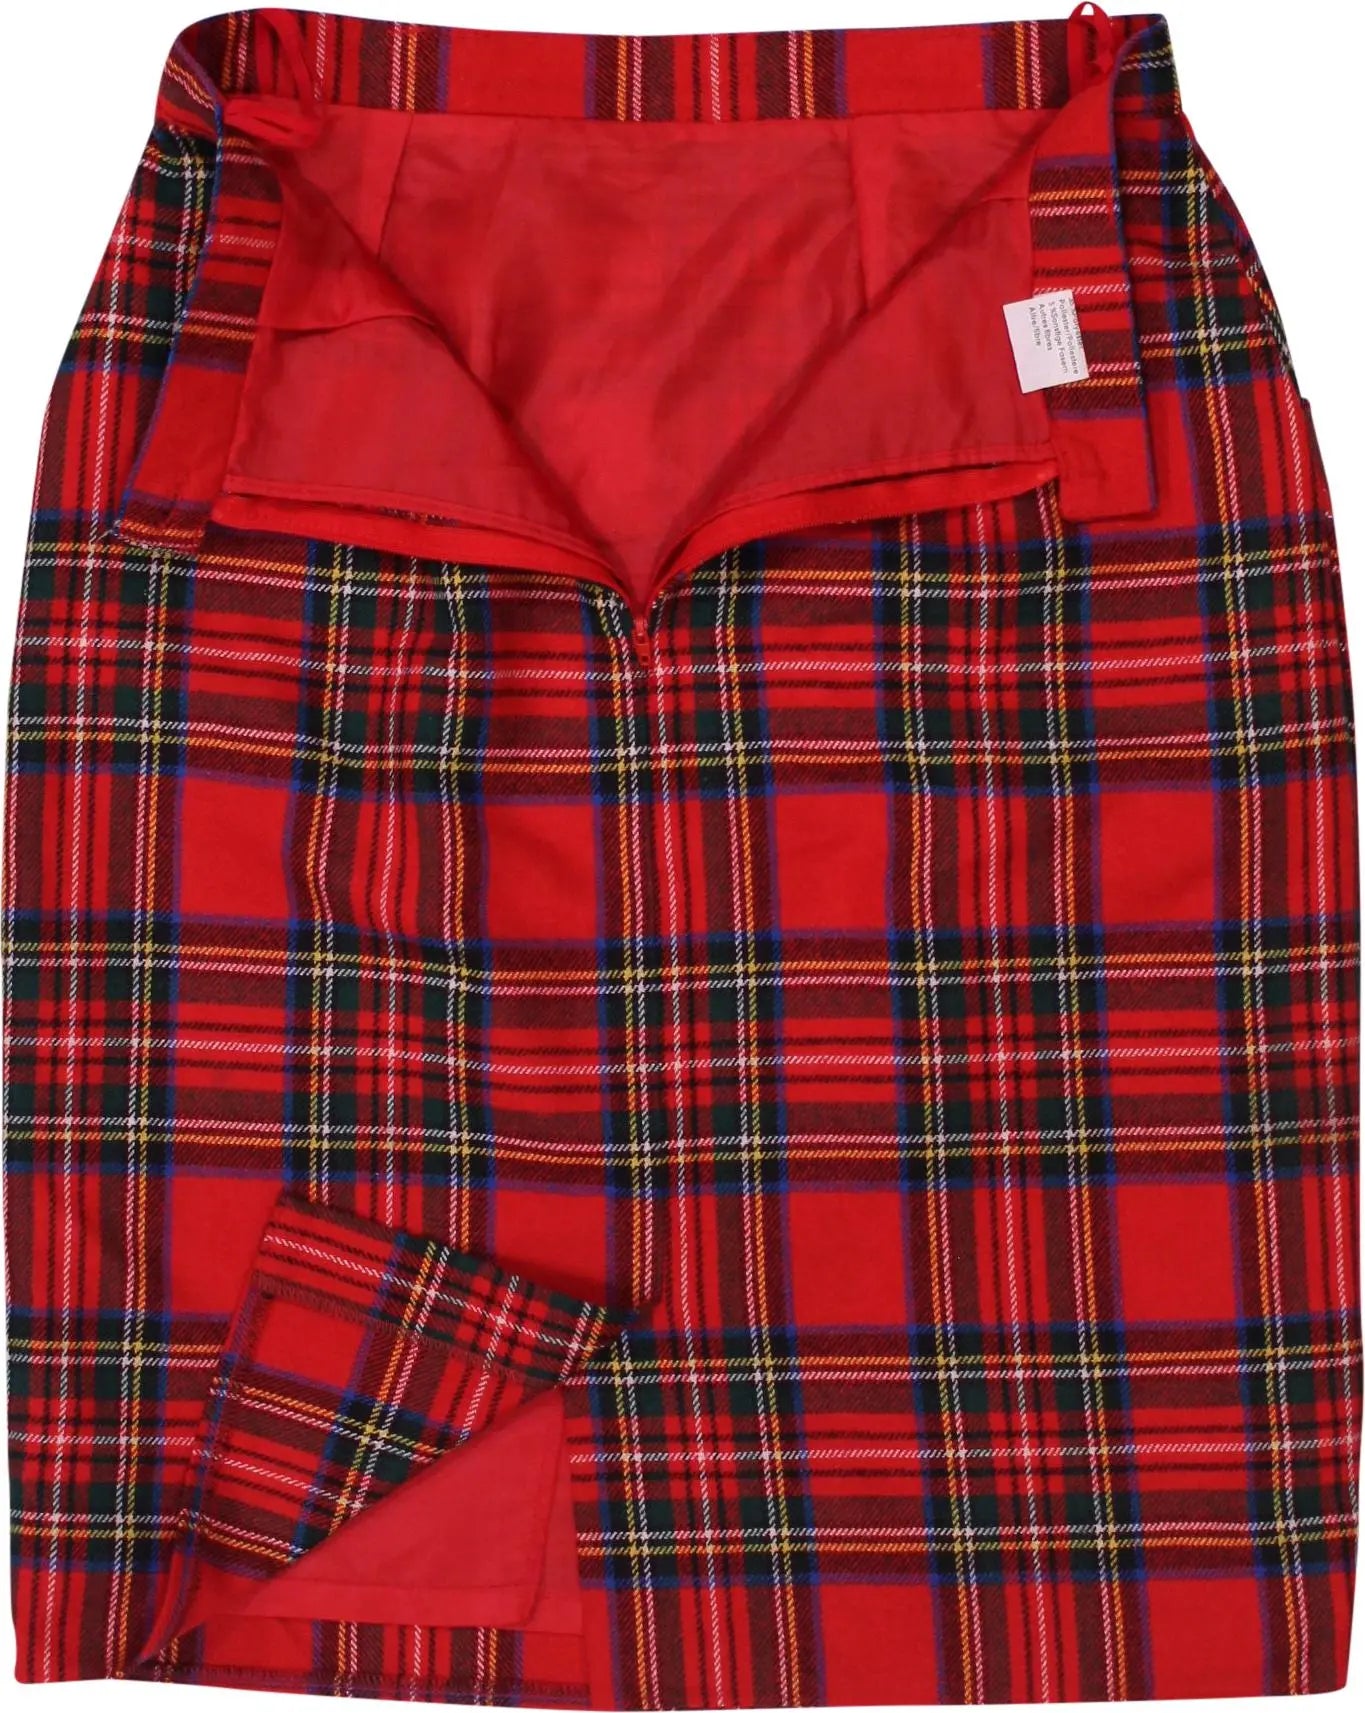 Unknown - Tartan Skirt- ThriftTale.com - Vintage and second handclothing